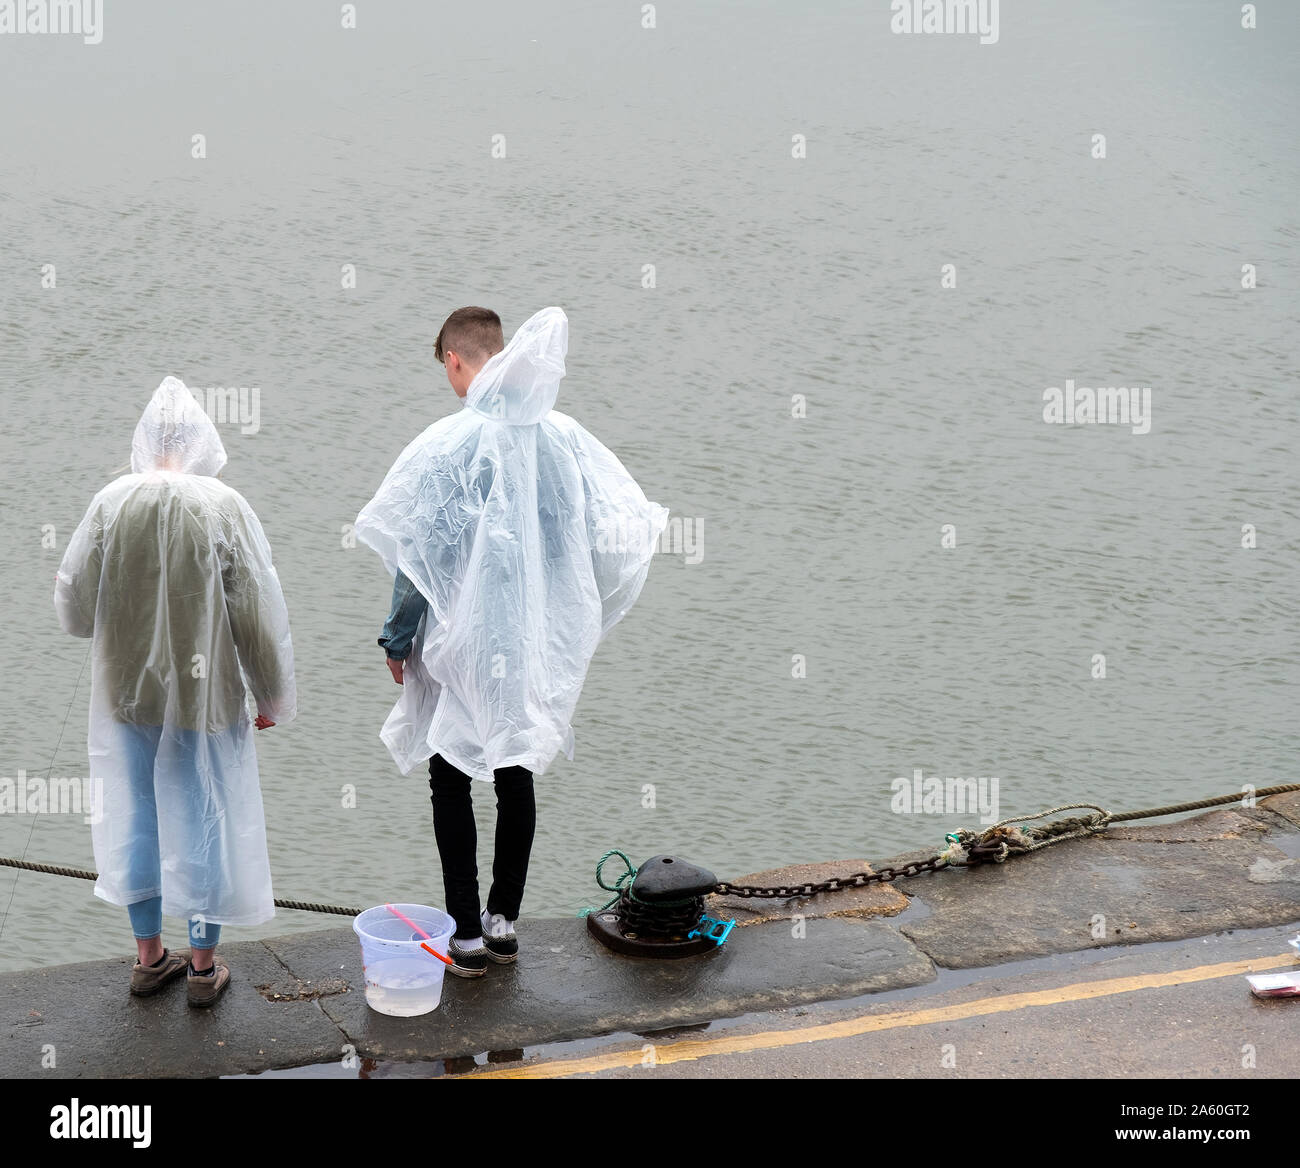 Two young people crab fishing in the rain Stock Photo